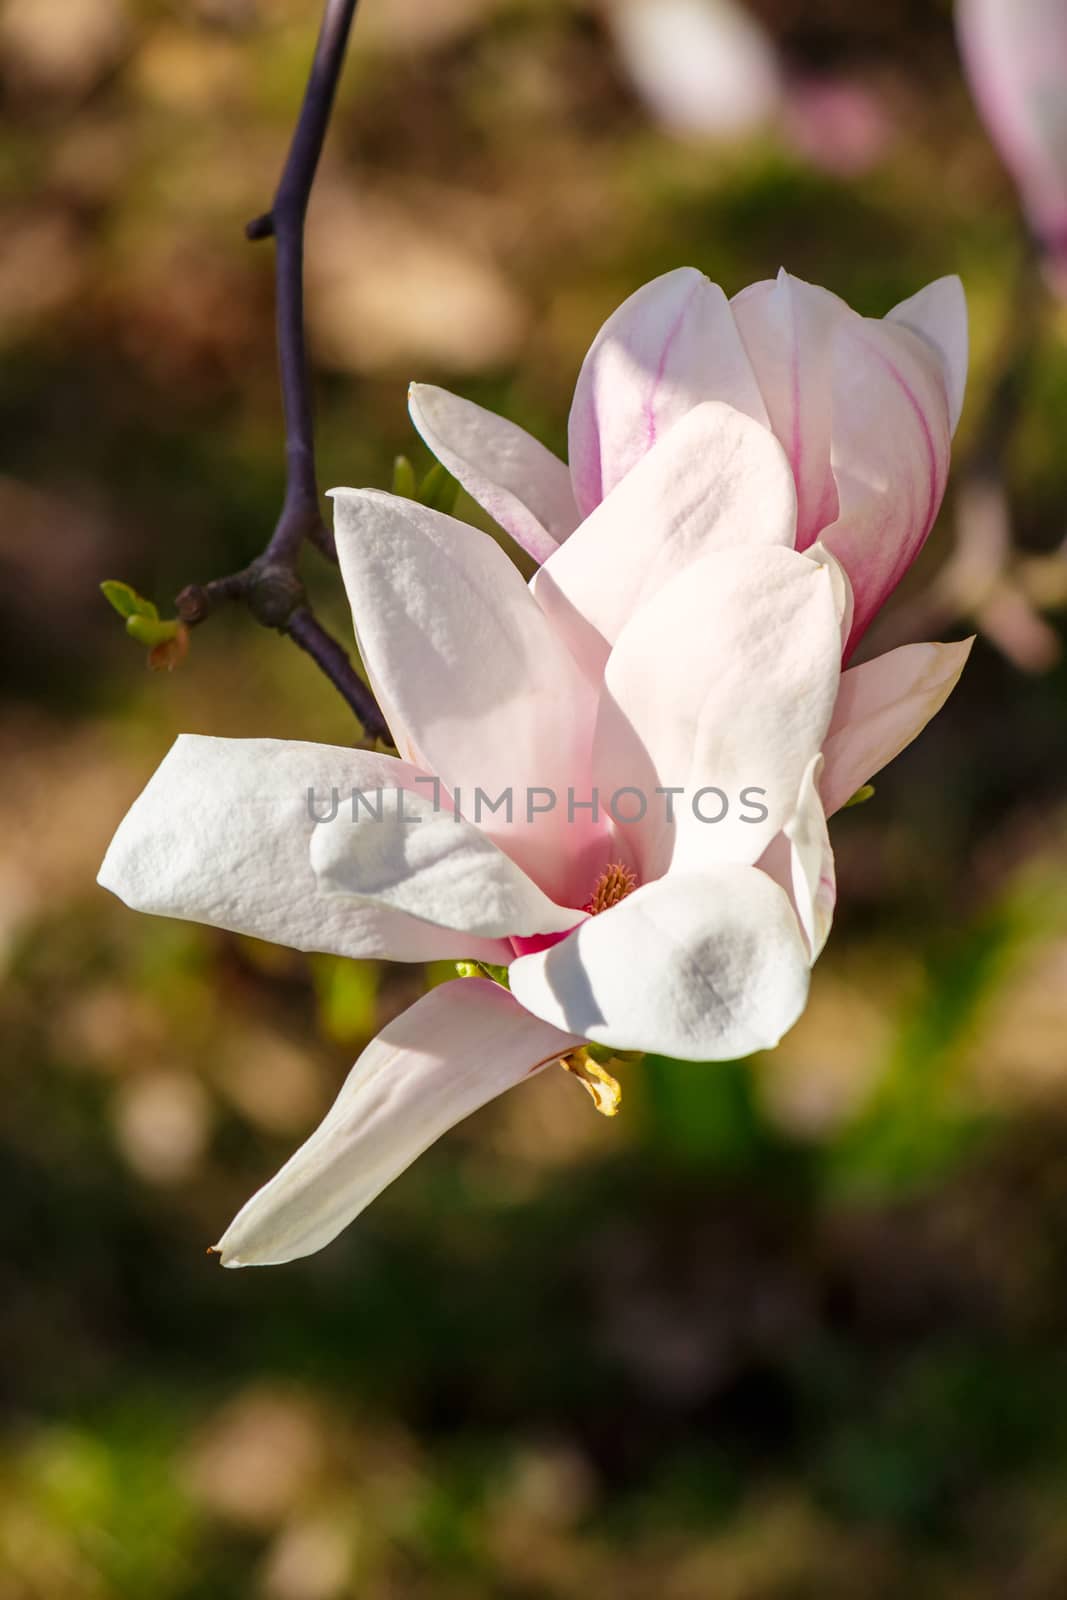 magnolia flowers on a blurry background by Pellinni